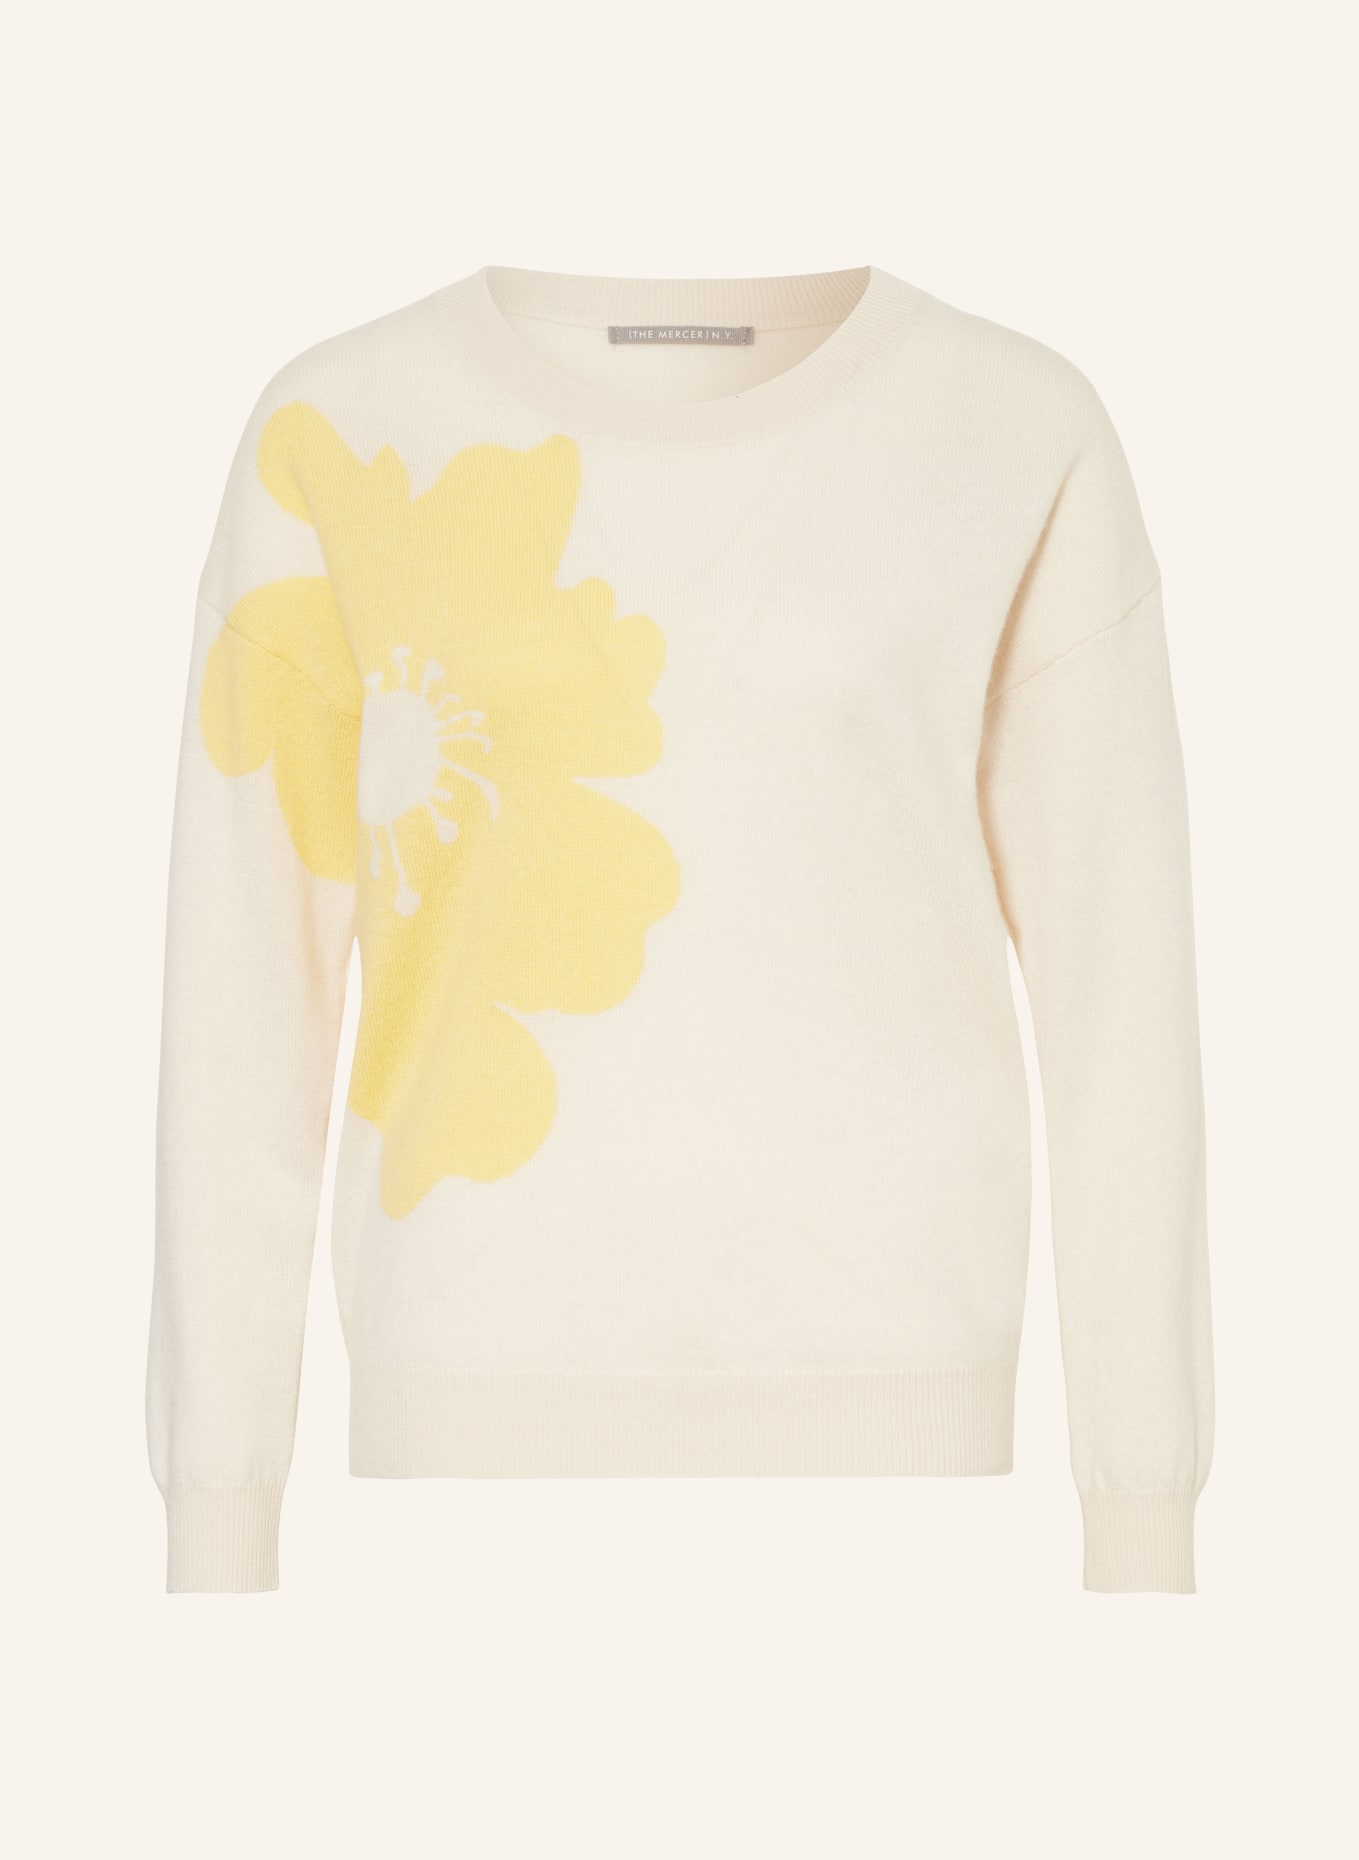 (THE MERCER) N.Y. Cashmere sweater, Color: CREAM/ YELLOW (Image 1)